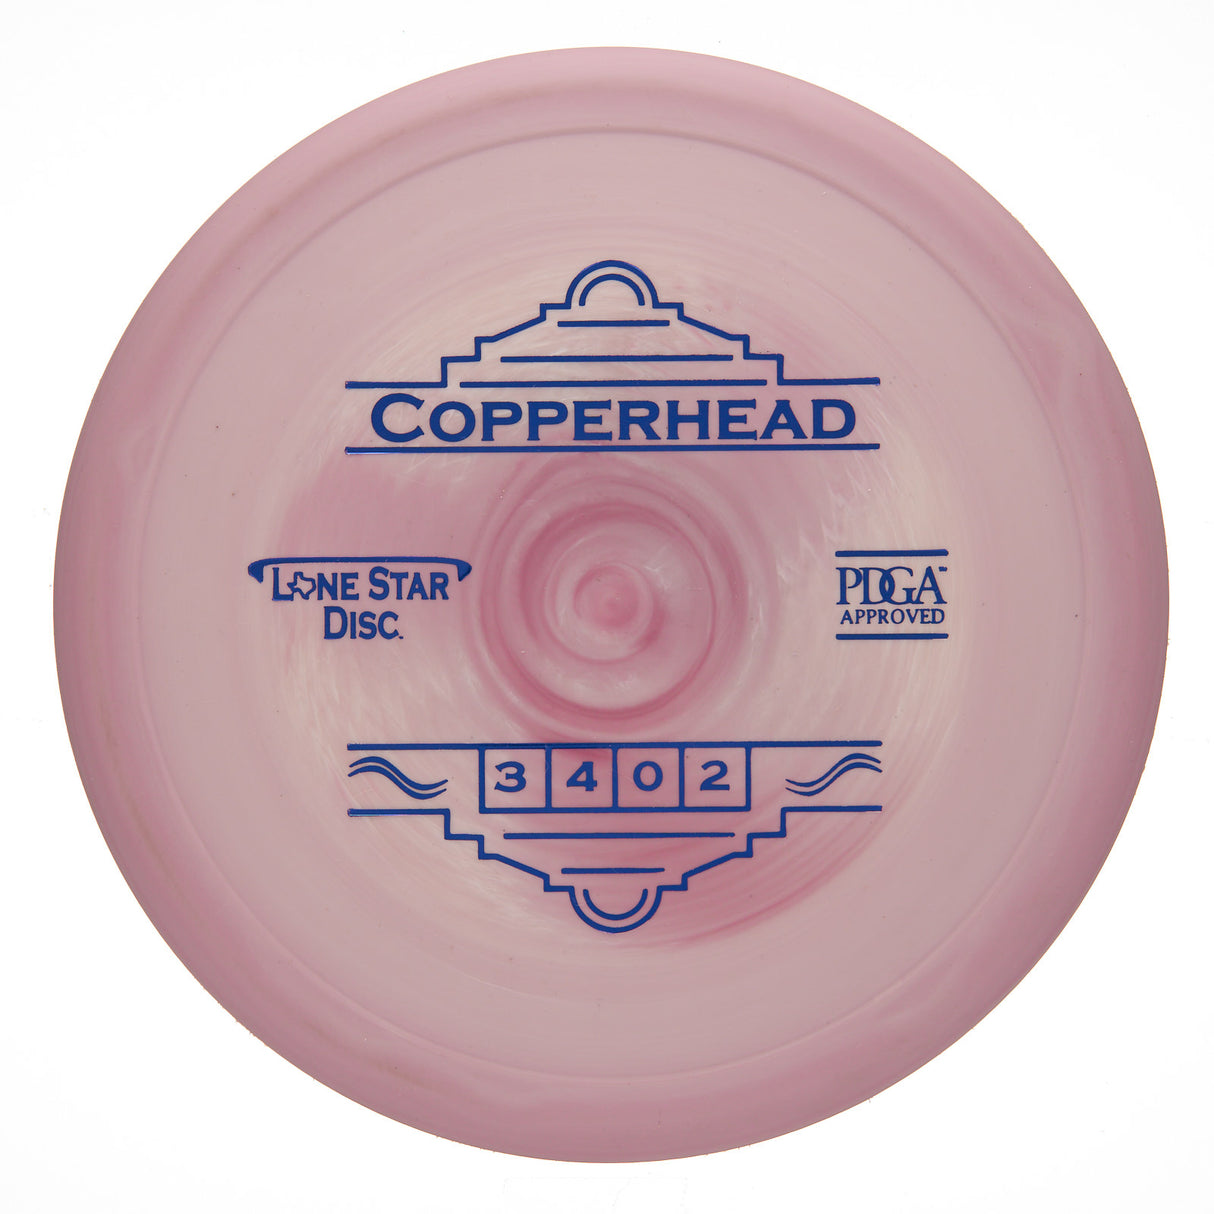 Lone Star Disc Copperhead - Victor 1 175g | Style 0002